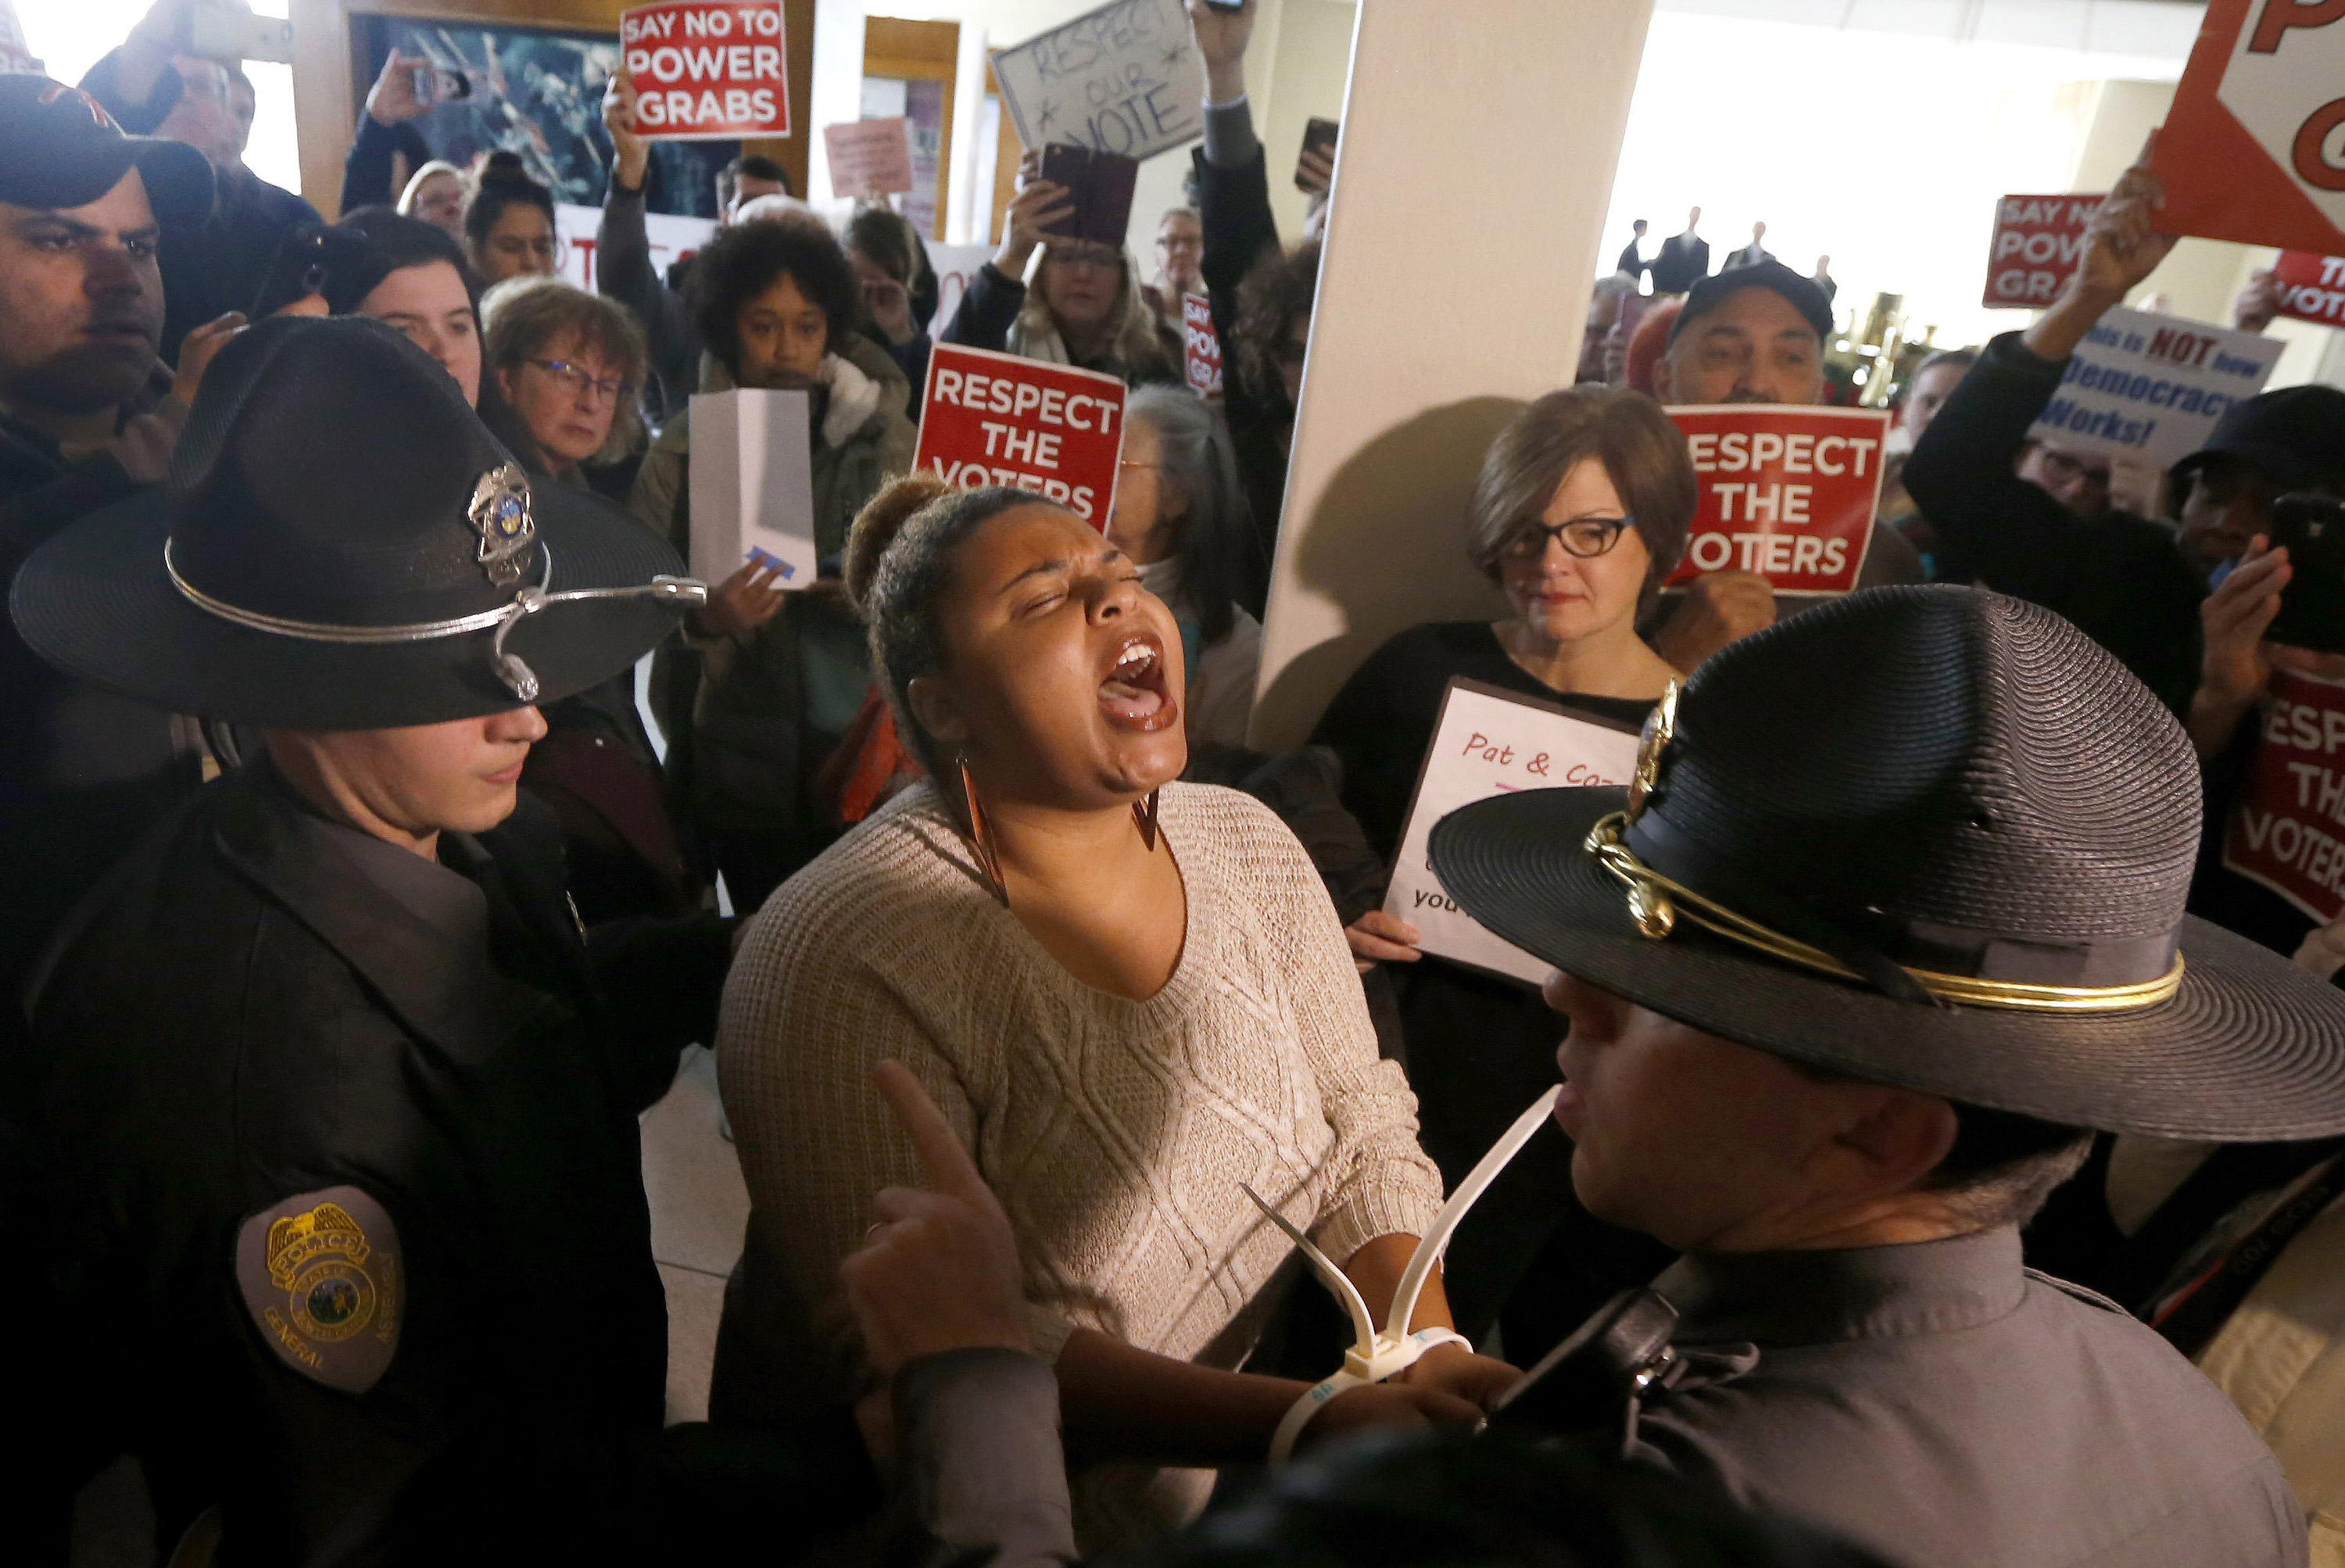 A protestor shouts as she is arrested outside the House gallery during a special session of the North Carolina General Assembly, Dec. 16, 2016 at the Legislative Building in Raleigh, N.C. (Ethan Hyman—Raleigh News & Observer/TNS/Getty Images)